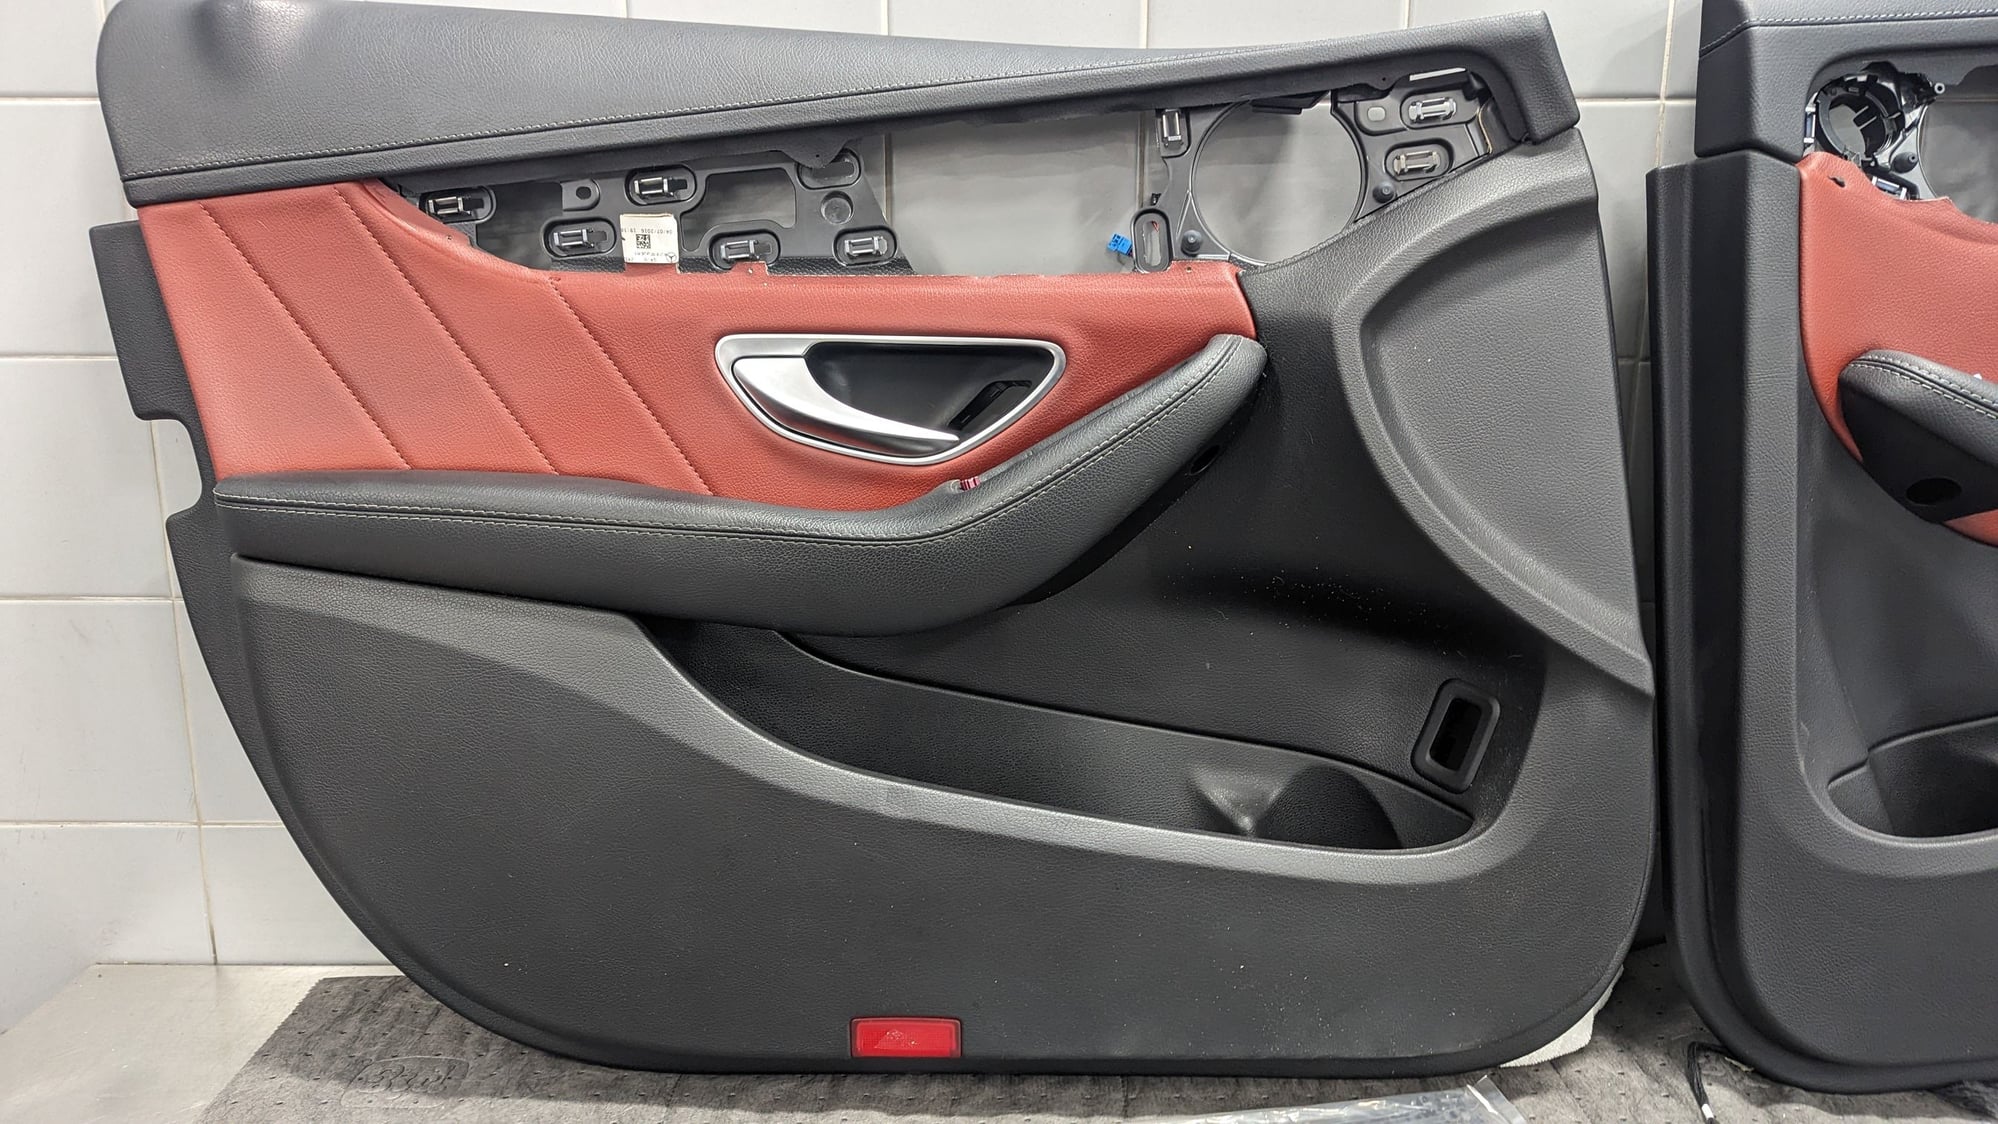 Interior/Upholstery - w205 Red leather interior seats and door panels - Used - 2014 to 2021 Mercedes-Benz C-Class - Bentonville, AR 72712, United States